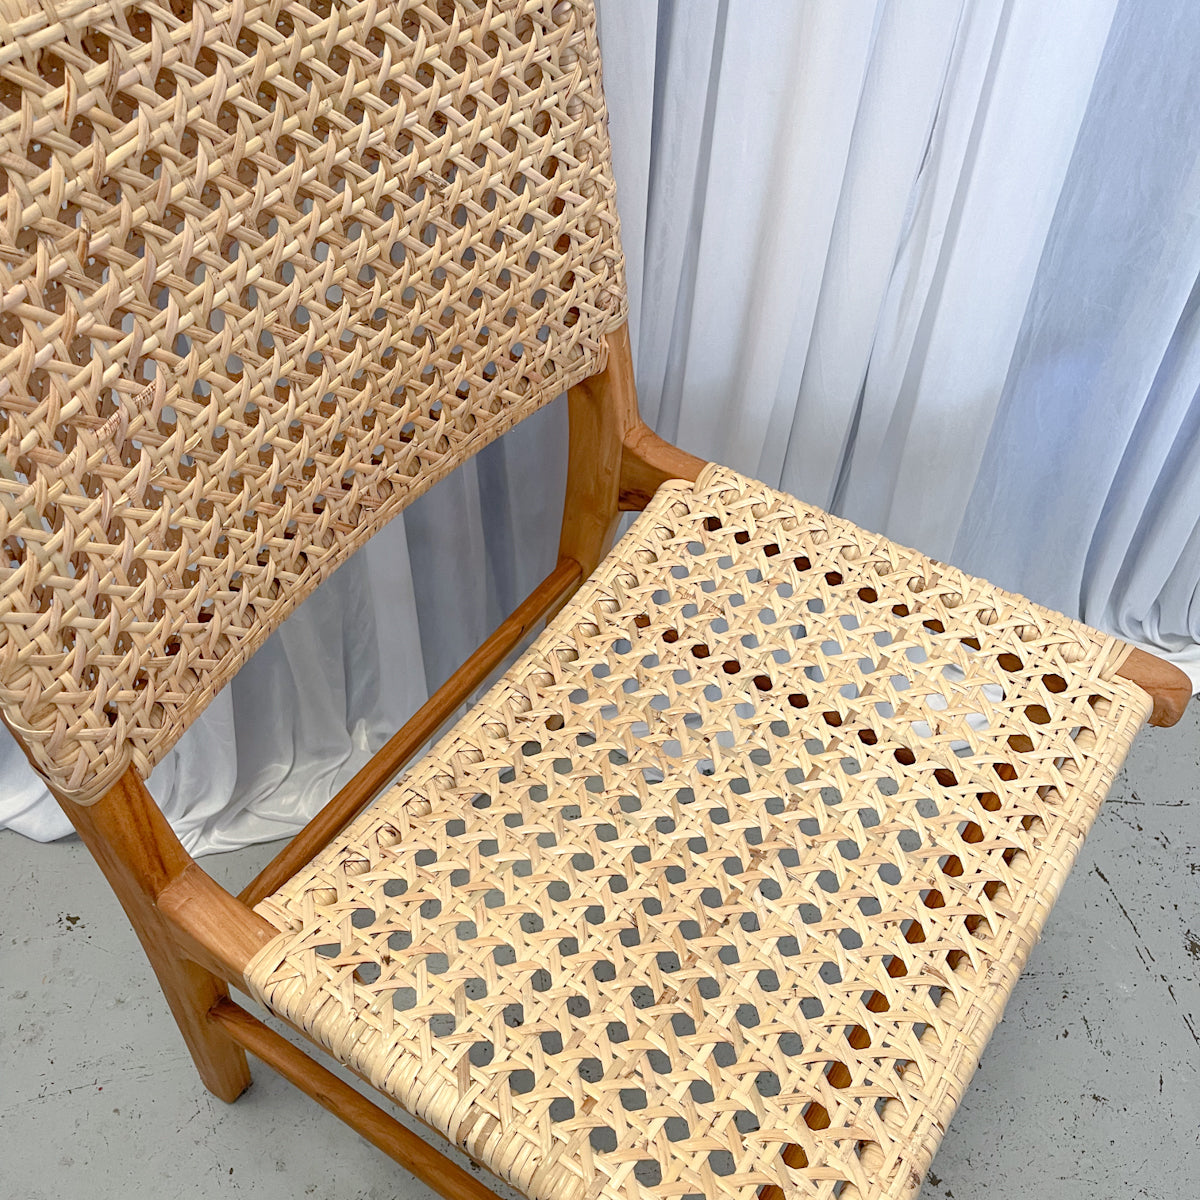 Lou Dining Chair